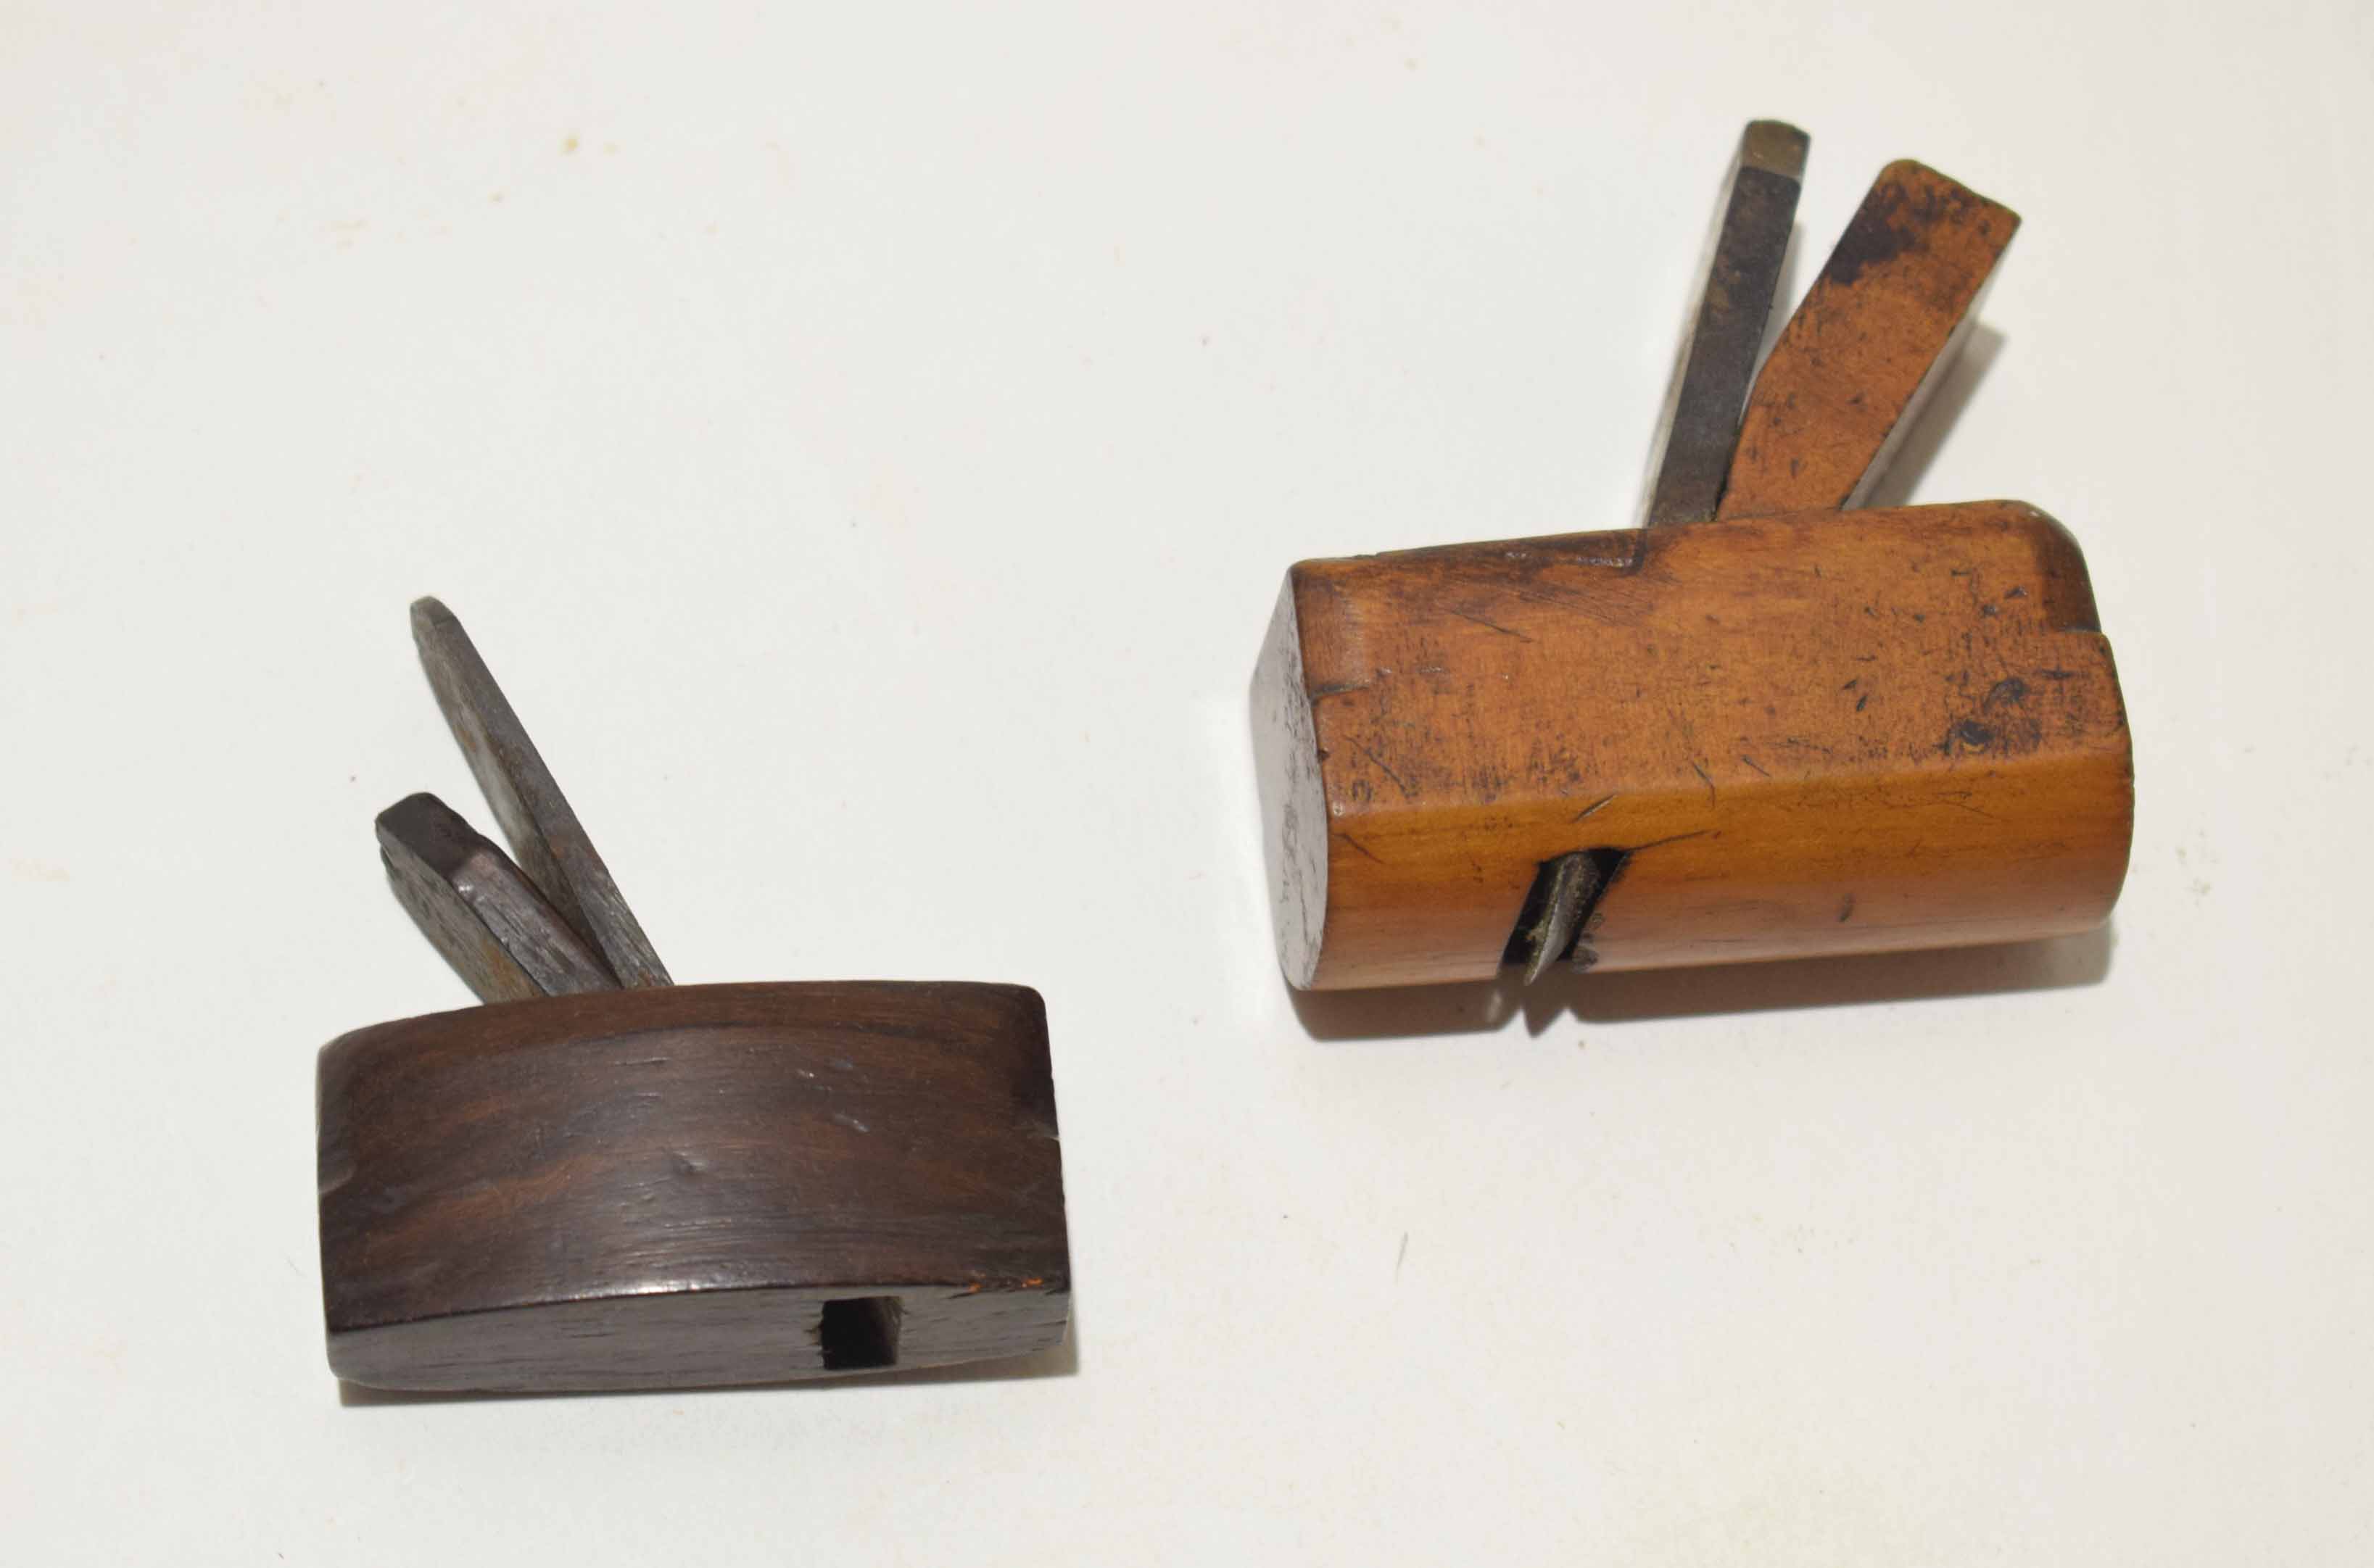 Two small wooden planes